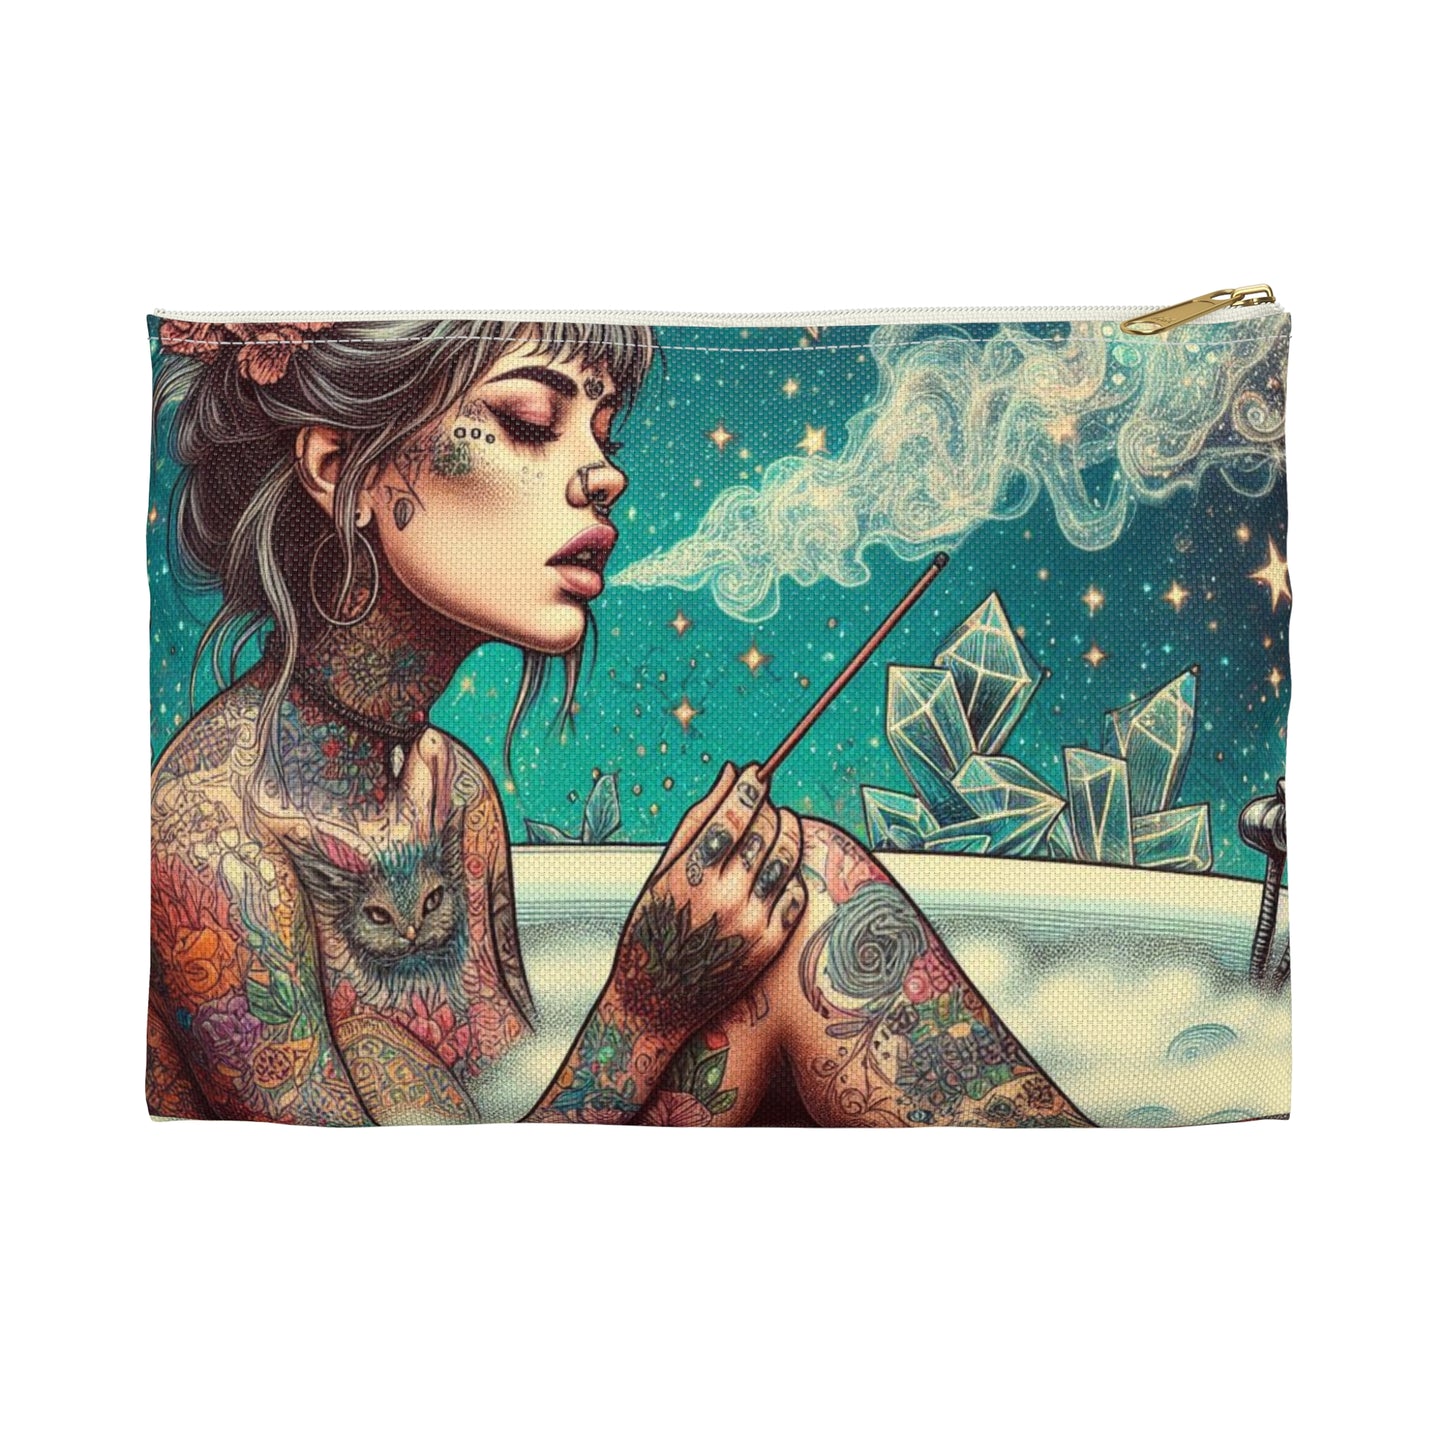 VIBIN' Reset & Recharge Accessory Pouch: Toiletries Bag, On-the-go Items, Tarot Deck, Crystals Bag